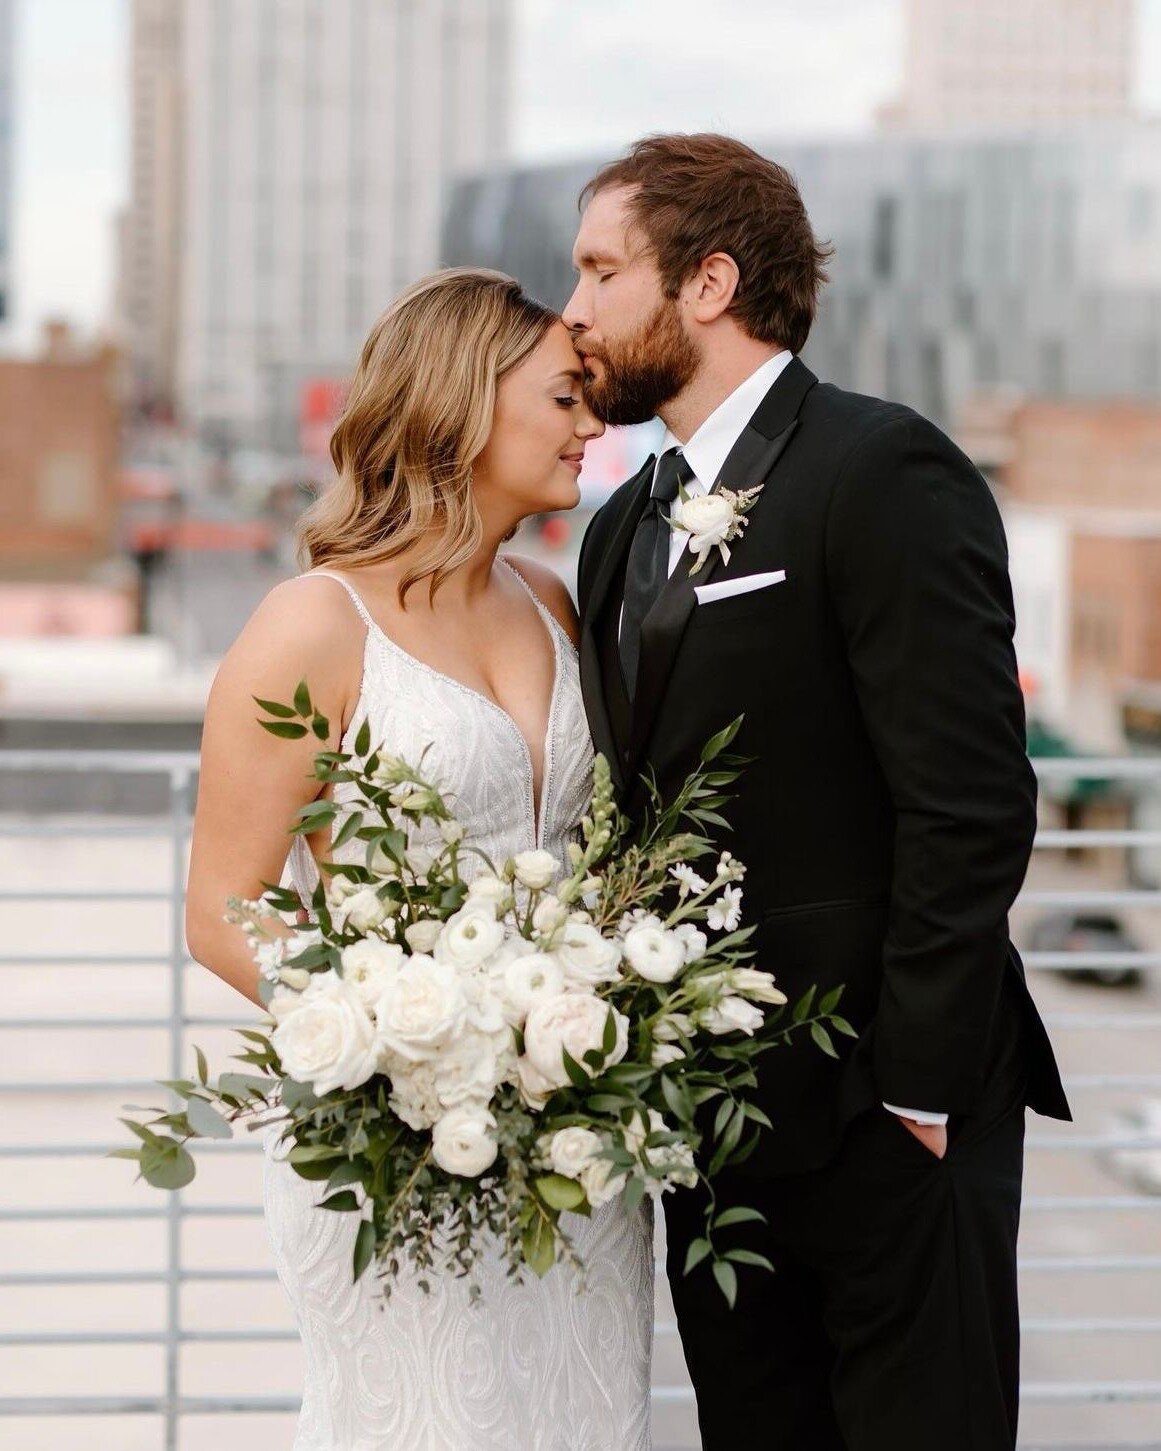 Wishing these two love birds a lifetime of happiness🤍 Thank you for having us be a part of your special day

📸: @kelsiecrockett
💌: @kayla_carney11

#kcpldistrict #kcmo #kcstylist #kchair #blowdrybarkc #kcmakeupartist #makeupinspo #poshkc #hairstyl